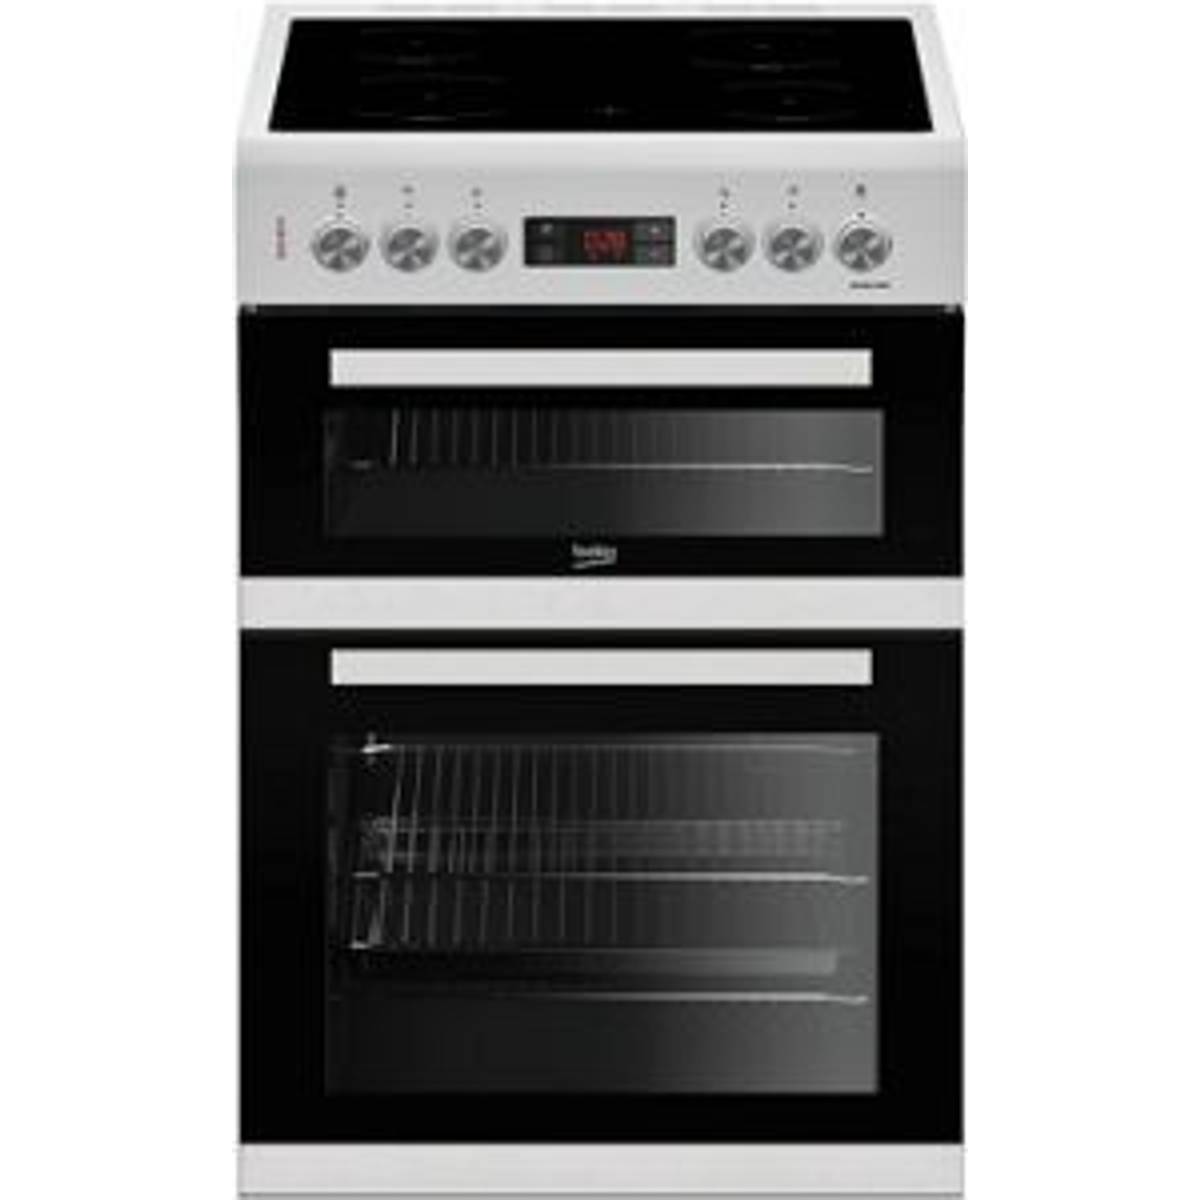 Beko electric cooker 60cm • Find the lowest price on PriceRunner